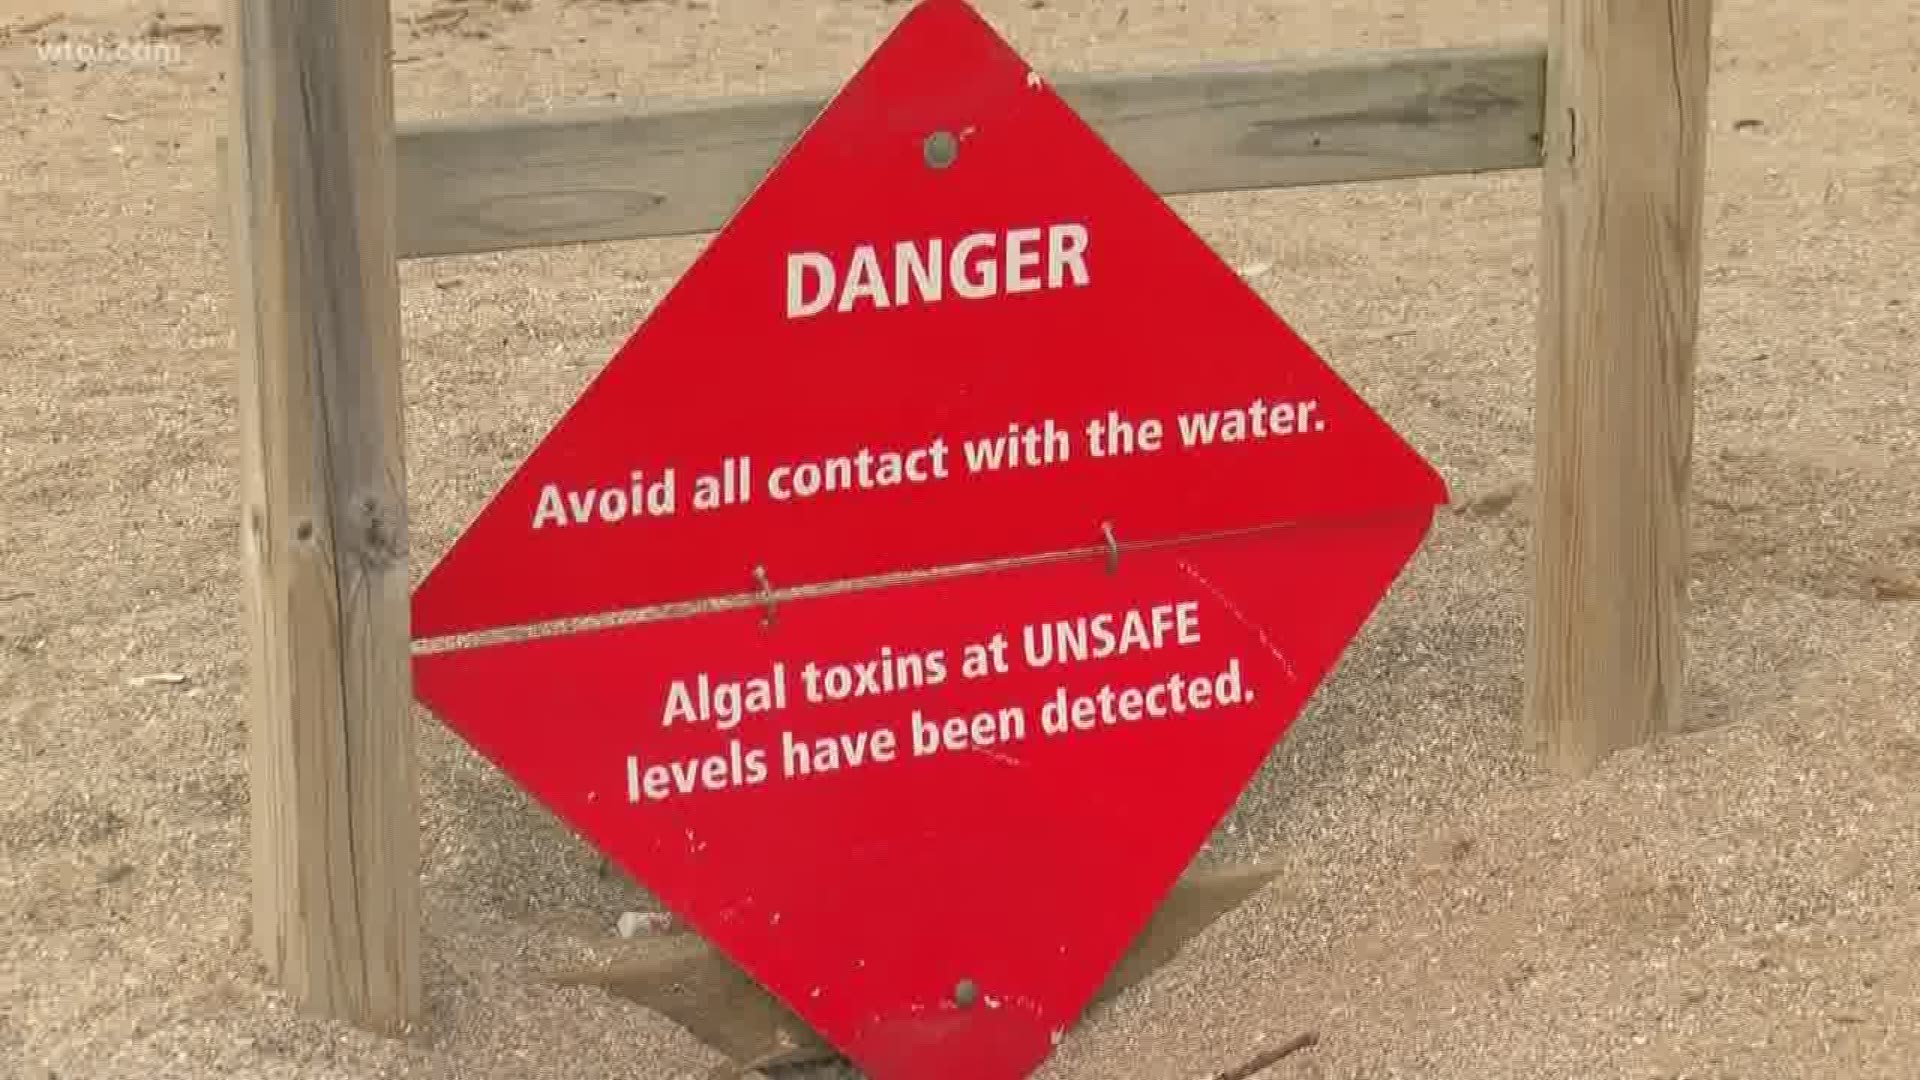 Meteorologist John Burchfield examines the health impacts of harmful algal blooms in our water.